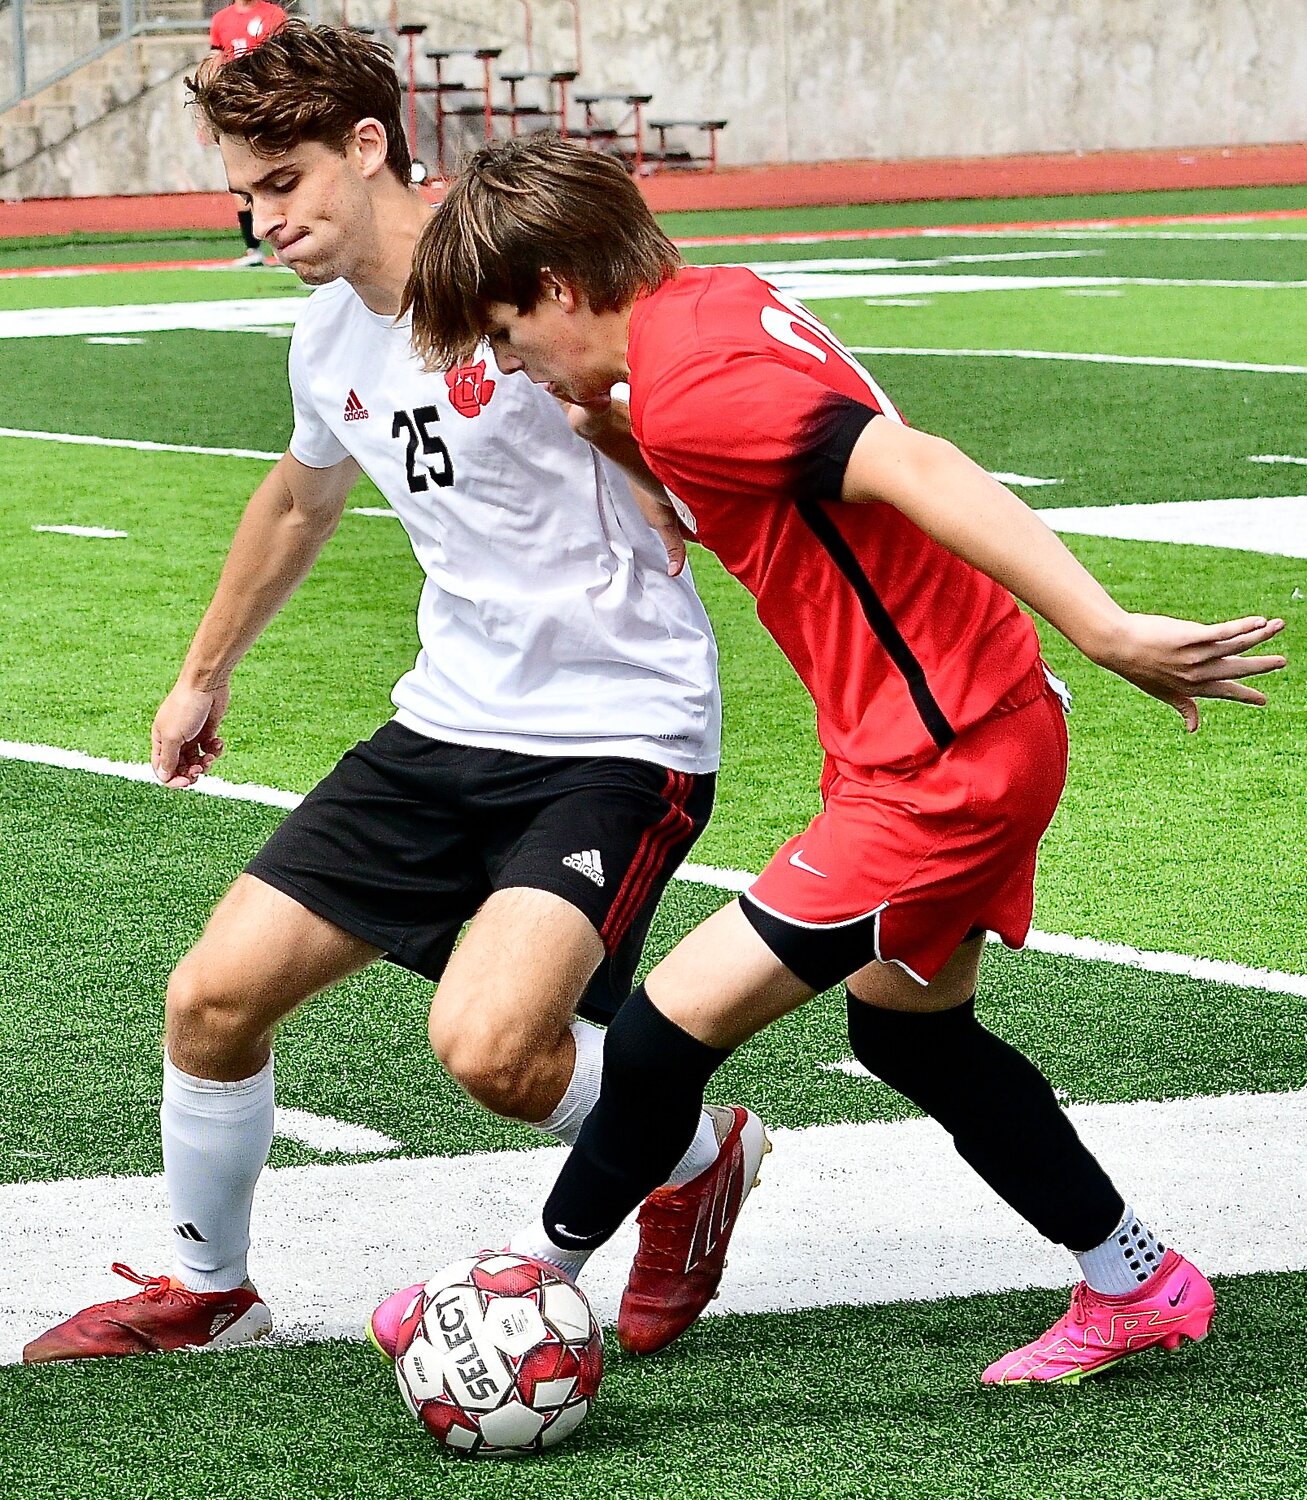 OZARK'S WYATT TROBAUGH tries to kick the ball away from a Chaminade player.